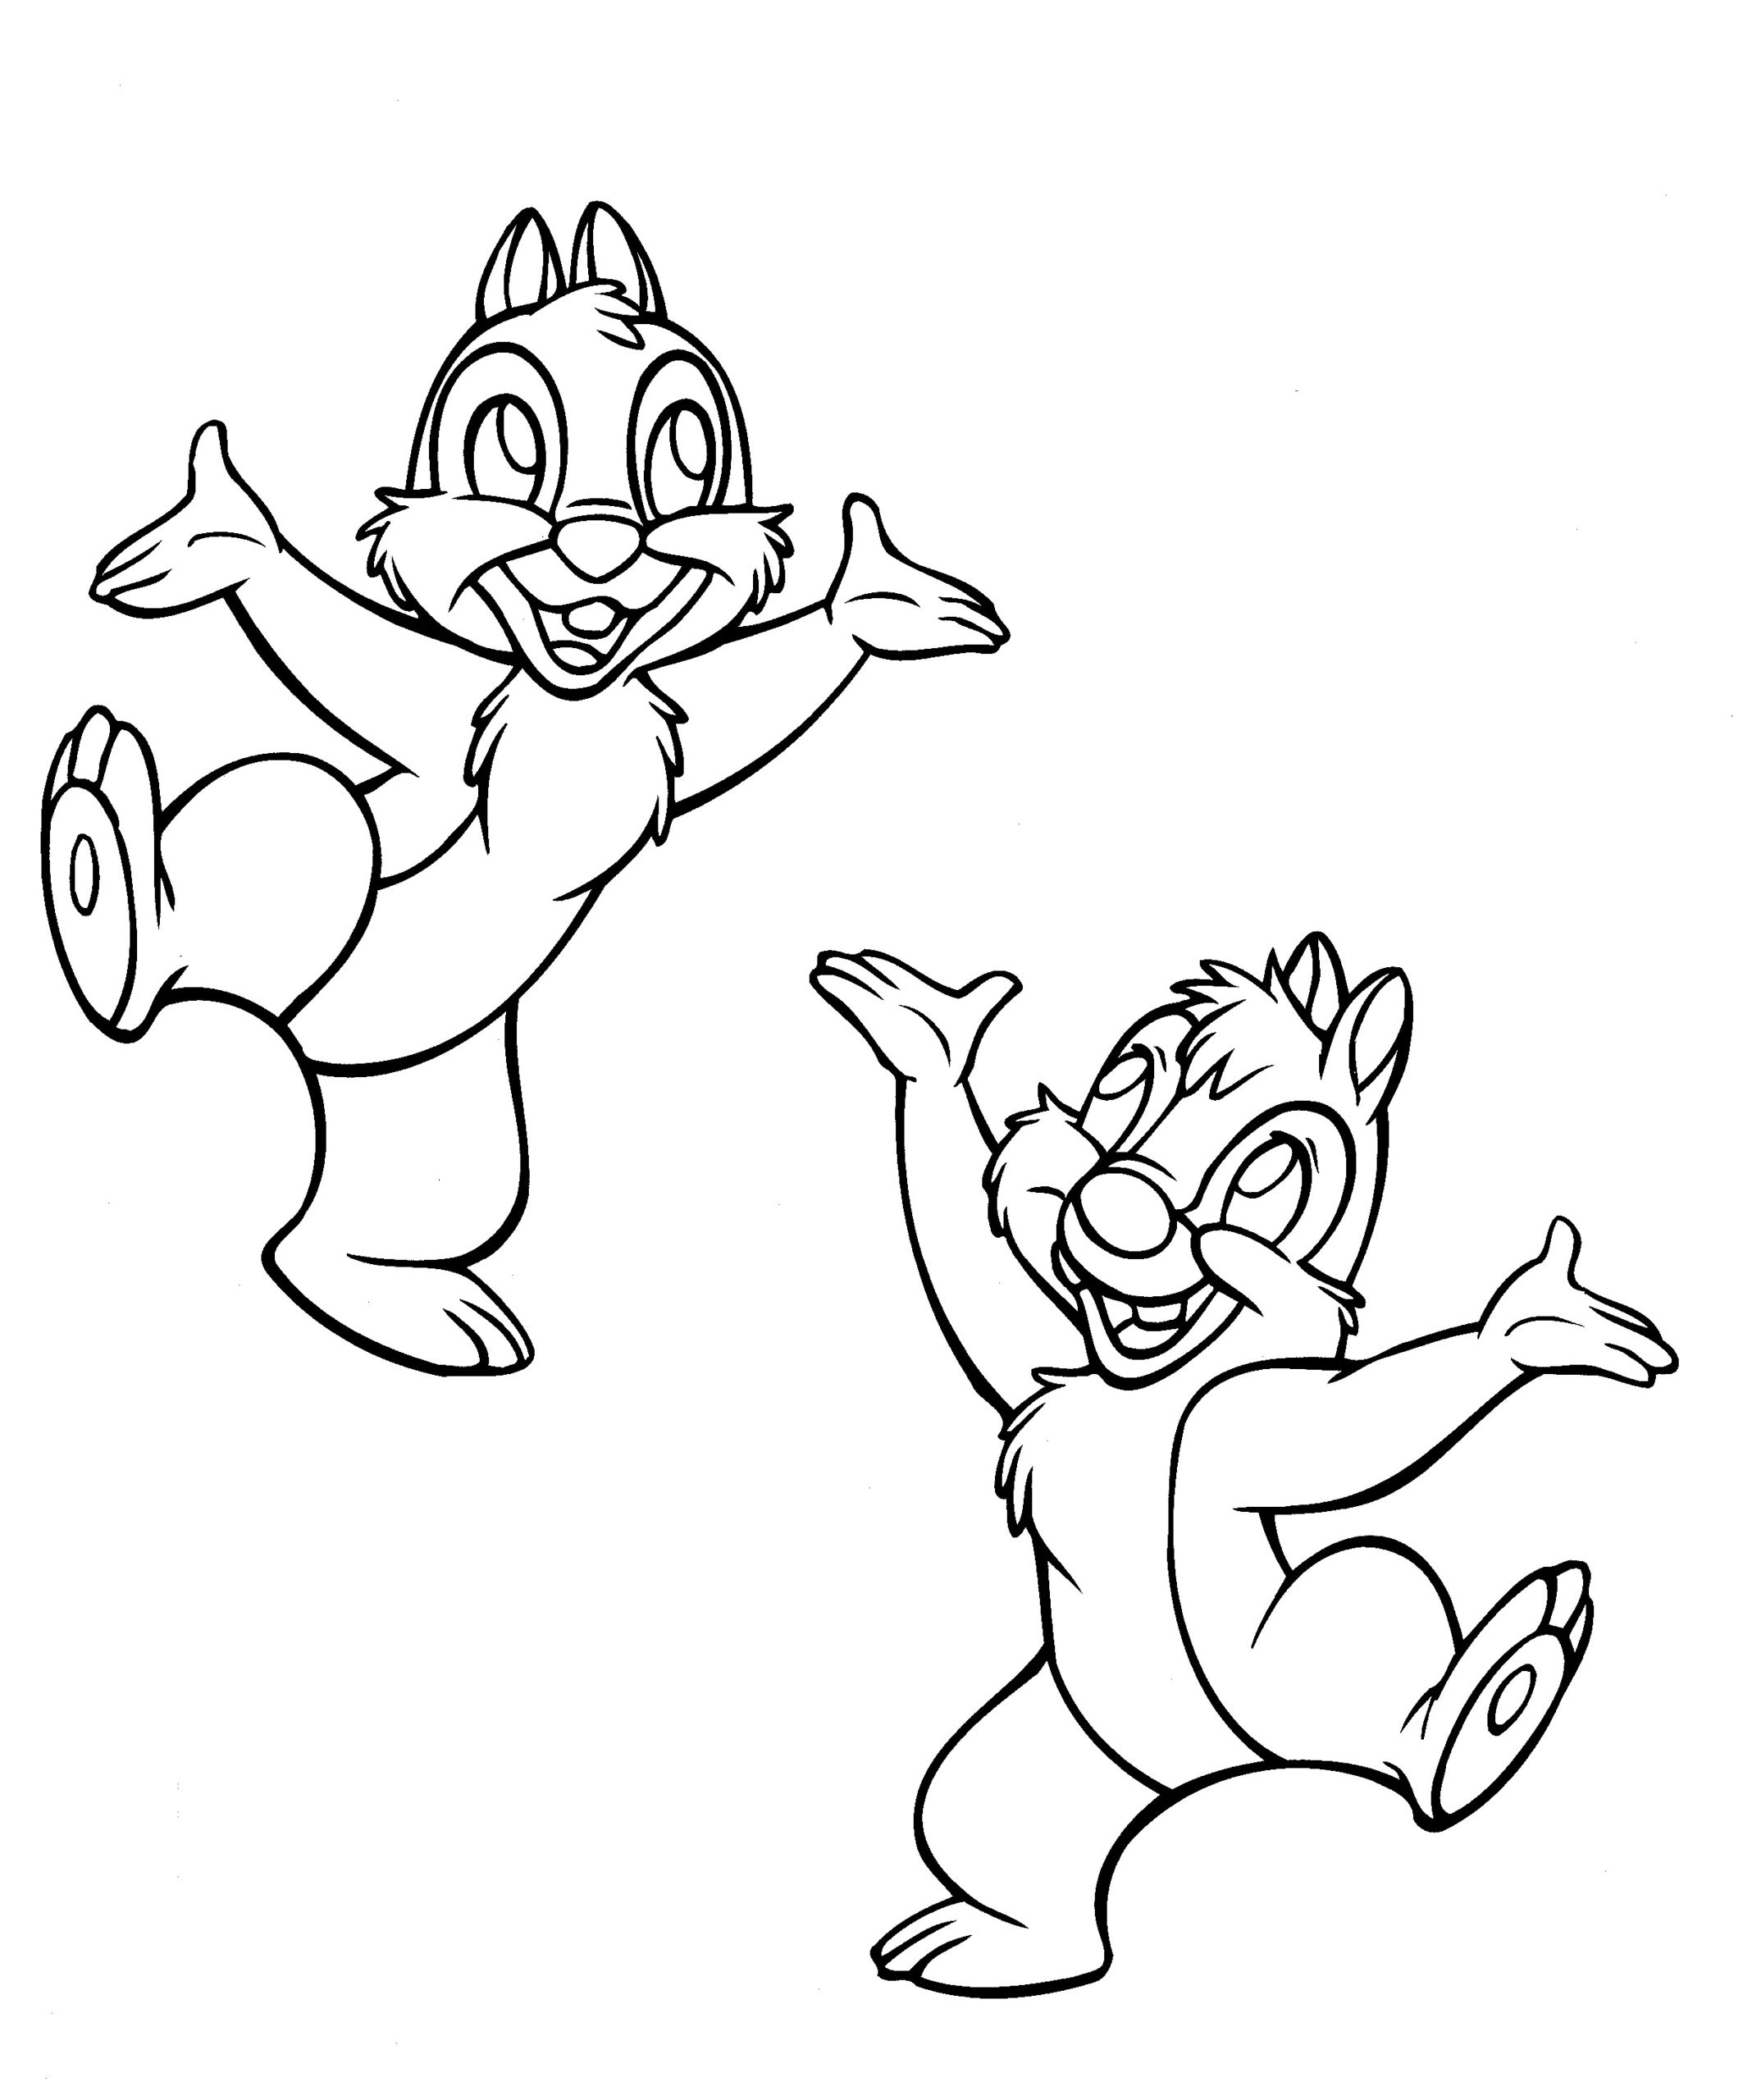 Disney coloring pages â chip and dale â the disney nerds podcast